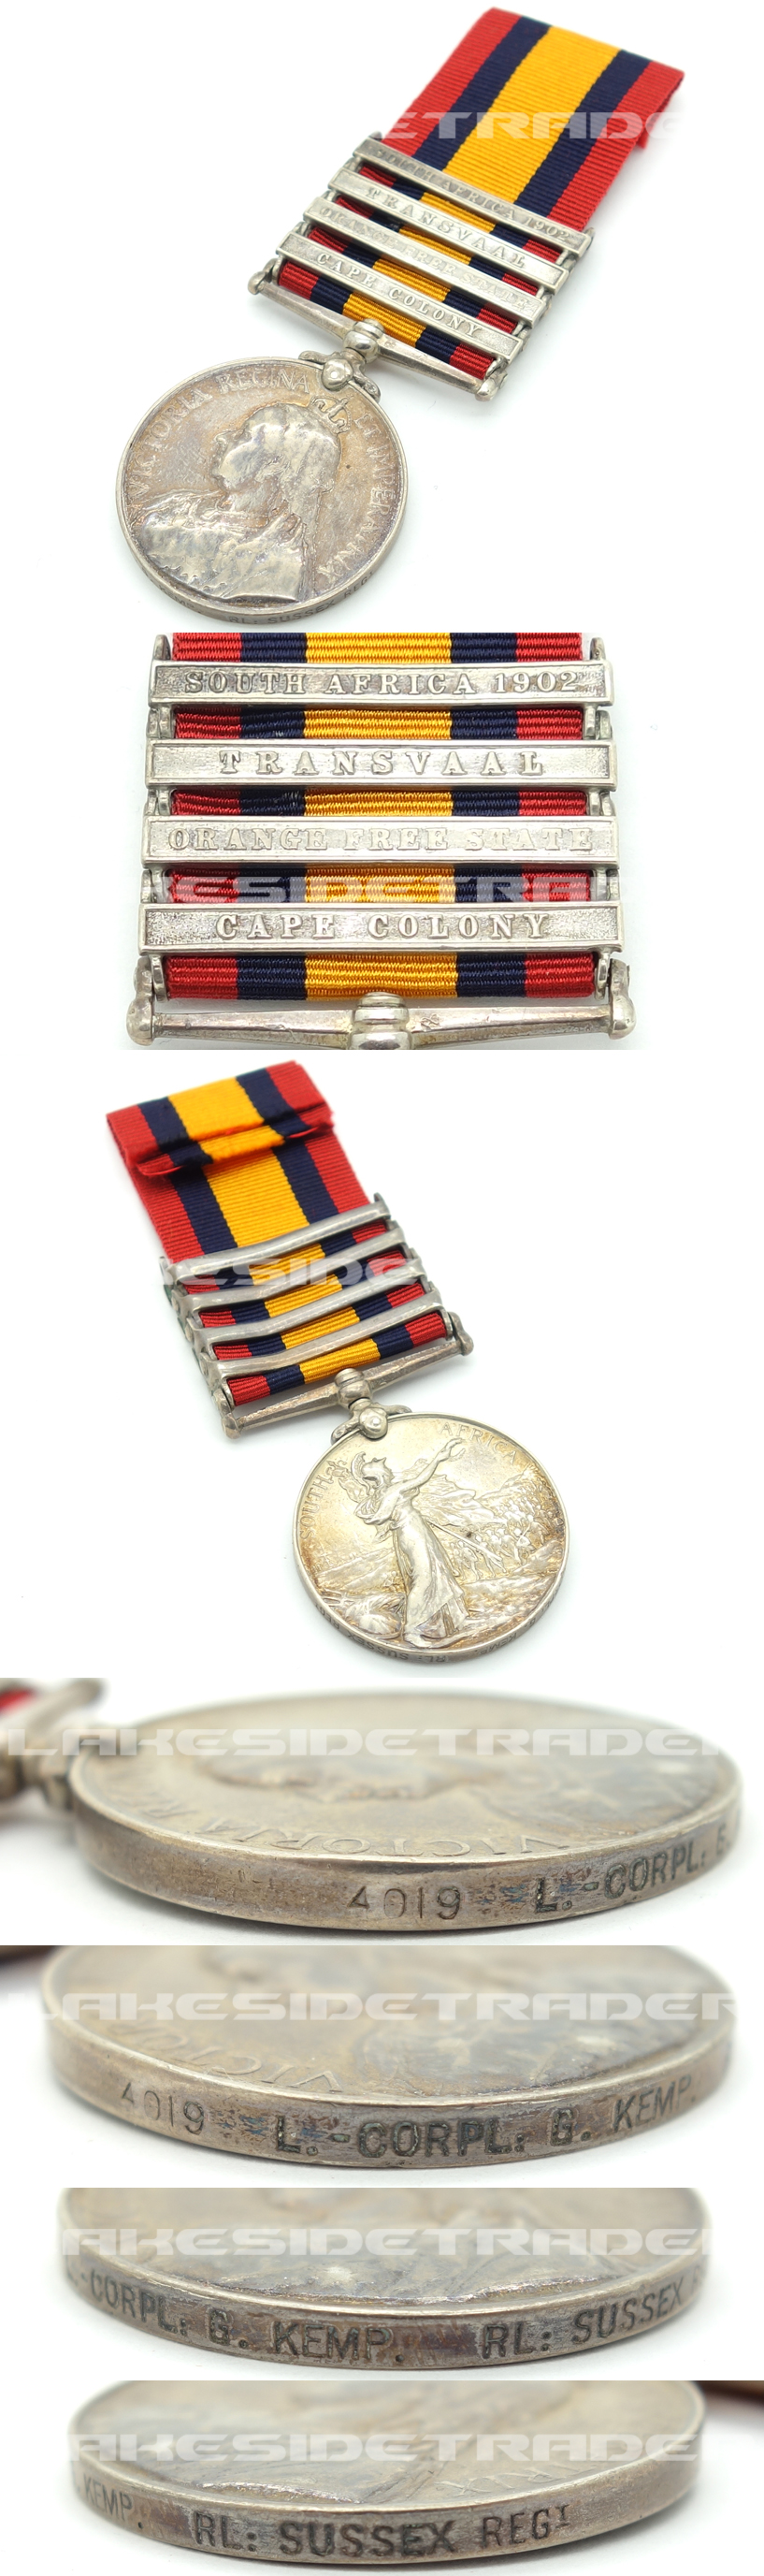 Queen’s South Africa Medal with Four Clasps